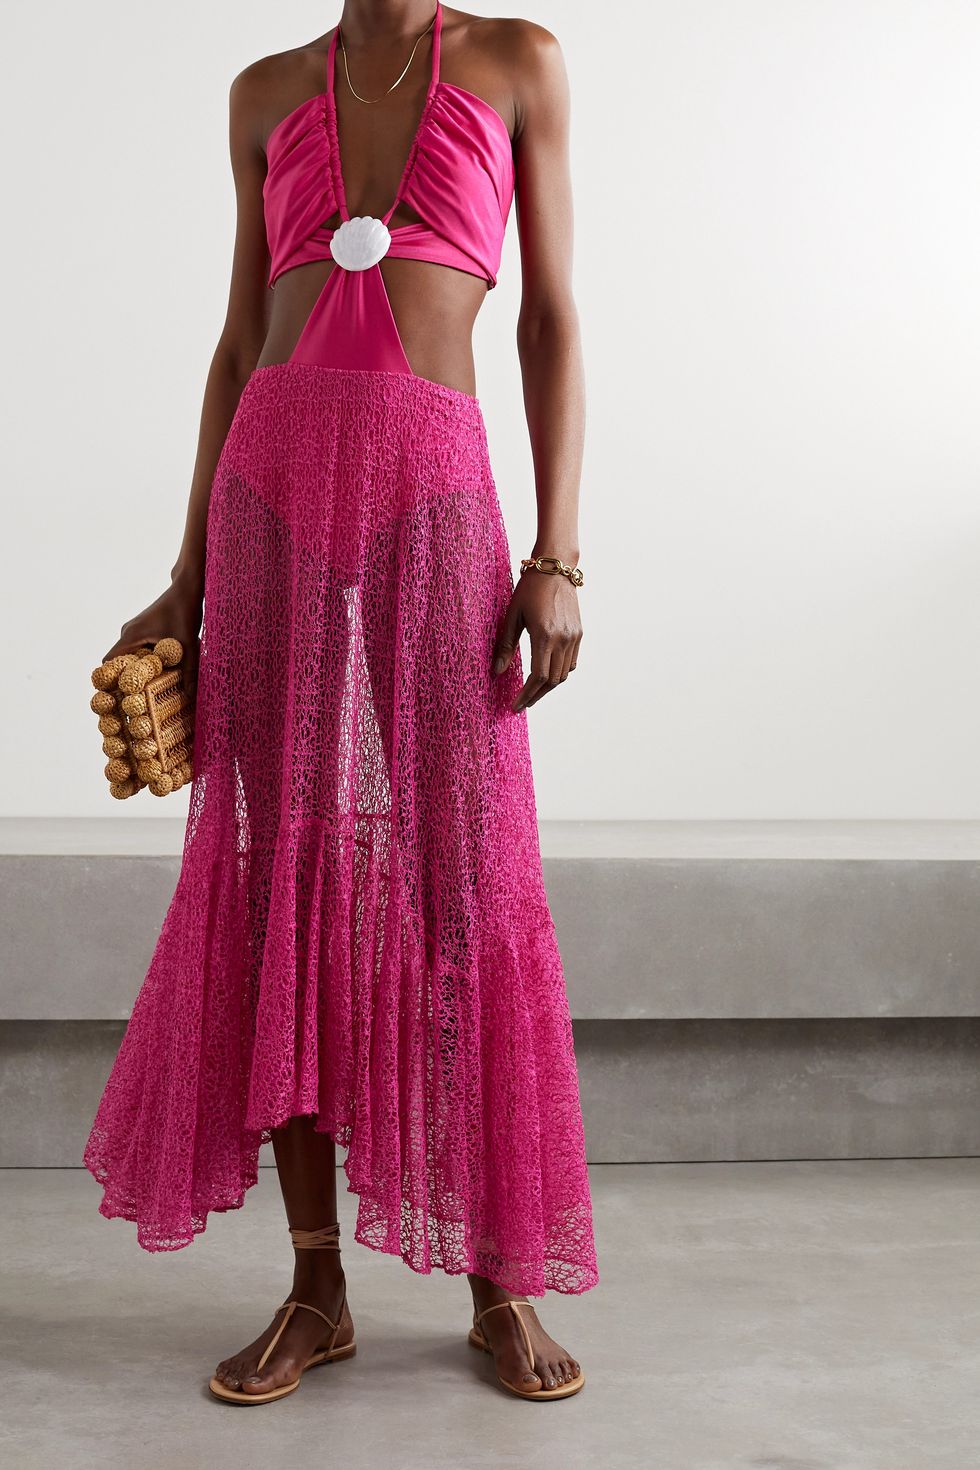 Cutout embellished swimsuit and crocheted maxi skirt